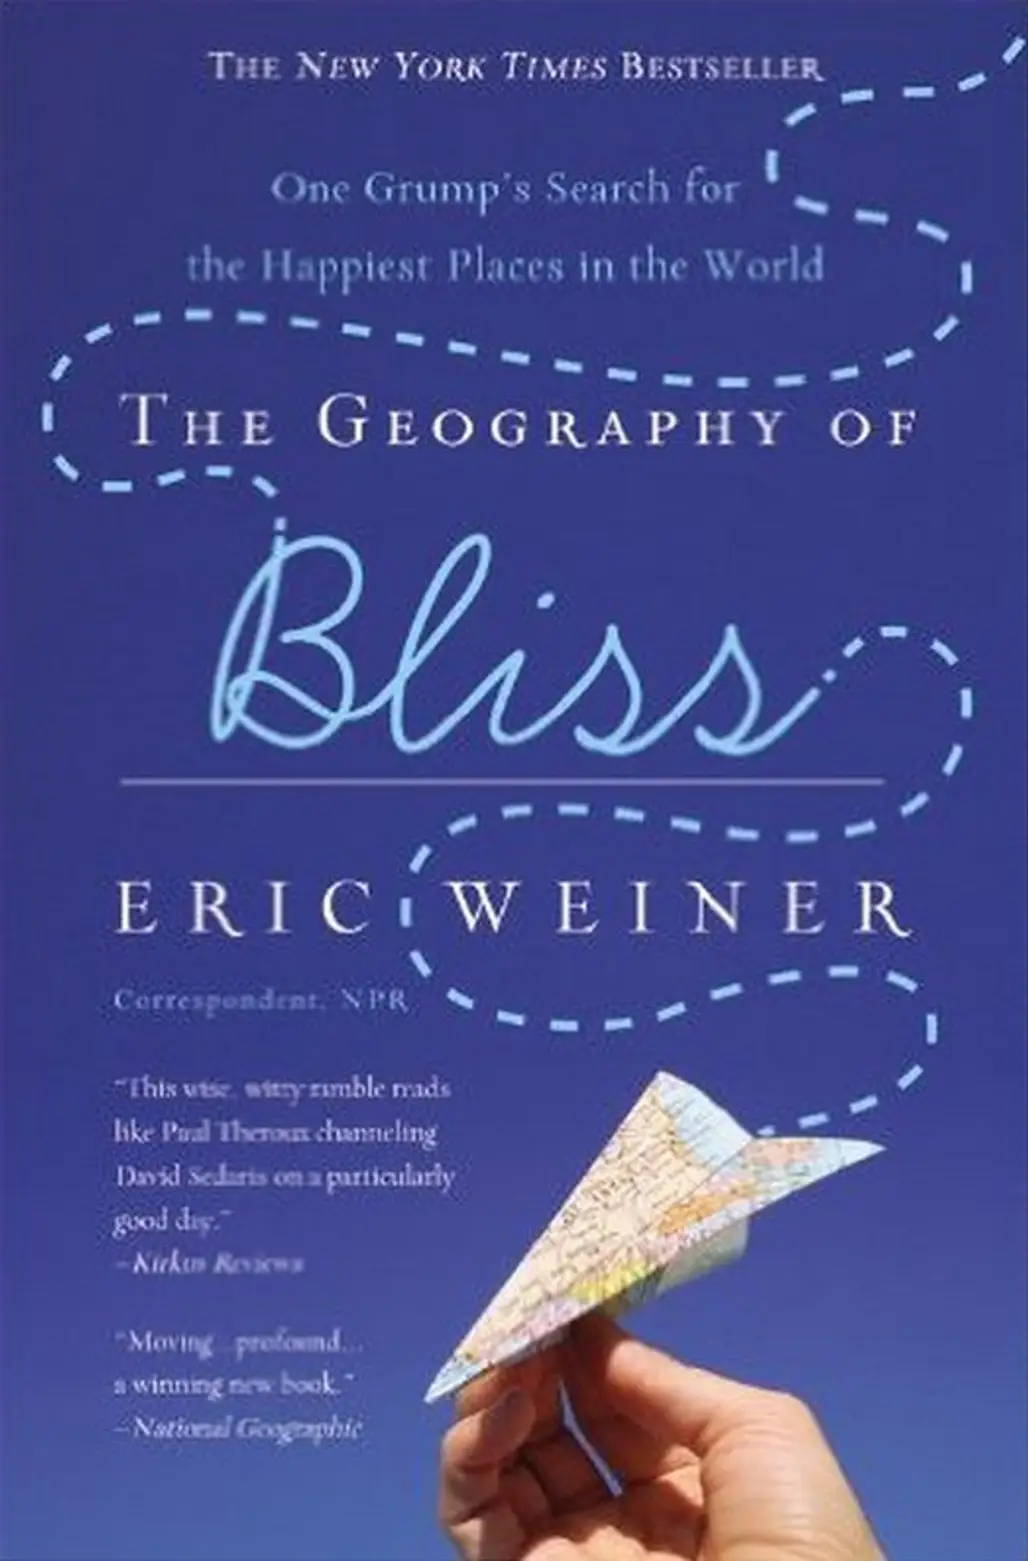 The Geography of Bliss: One Grump’s Search for the Happiest Places in the World by Eric Weiner